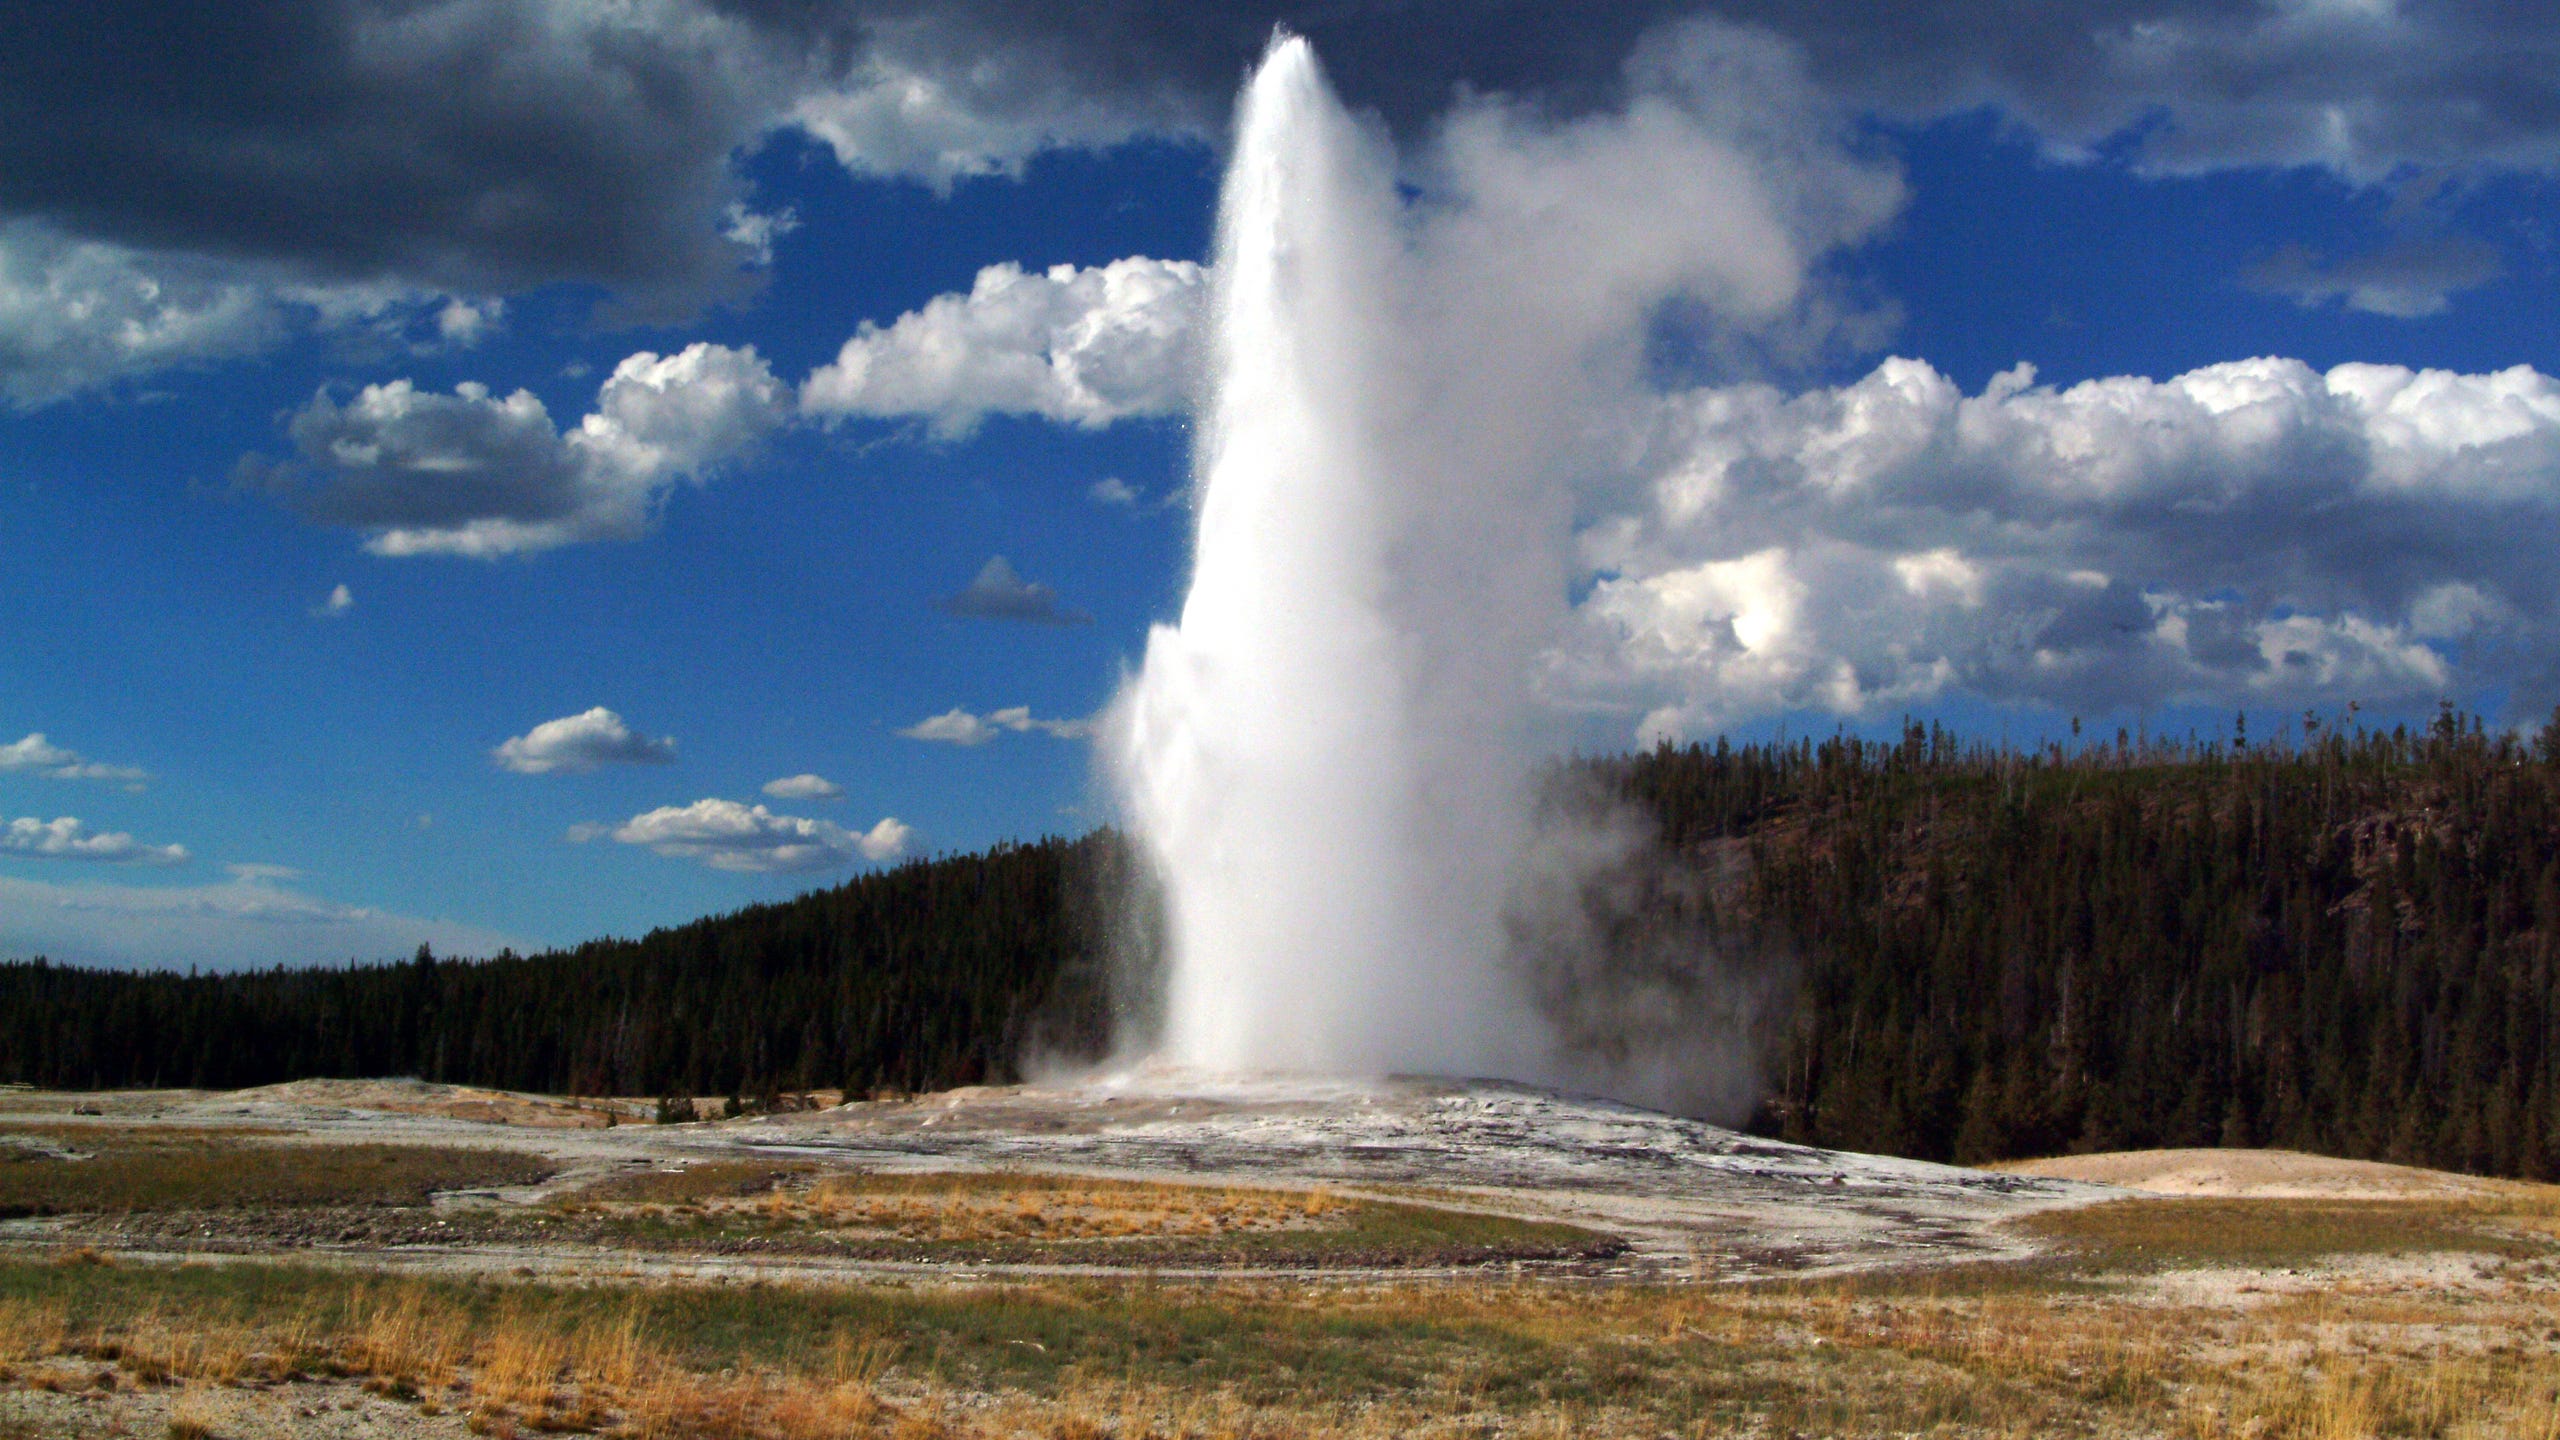 The Old Faithful geyser in Yellowstone National Park, Wyoming, USA.